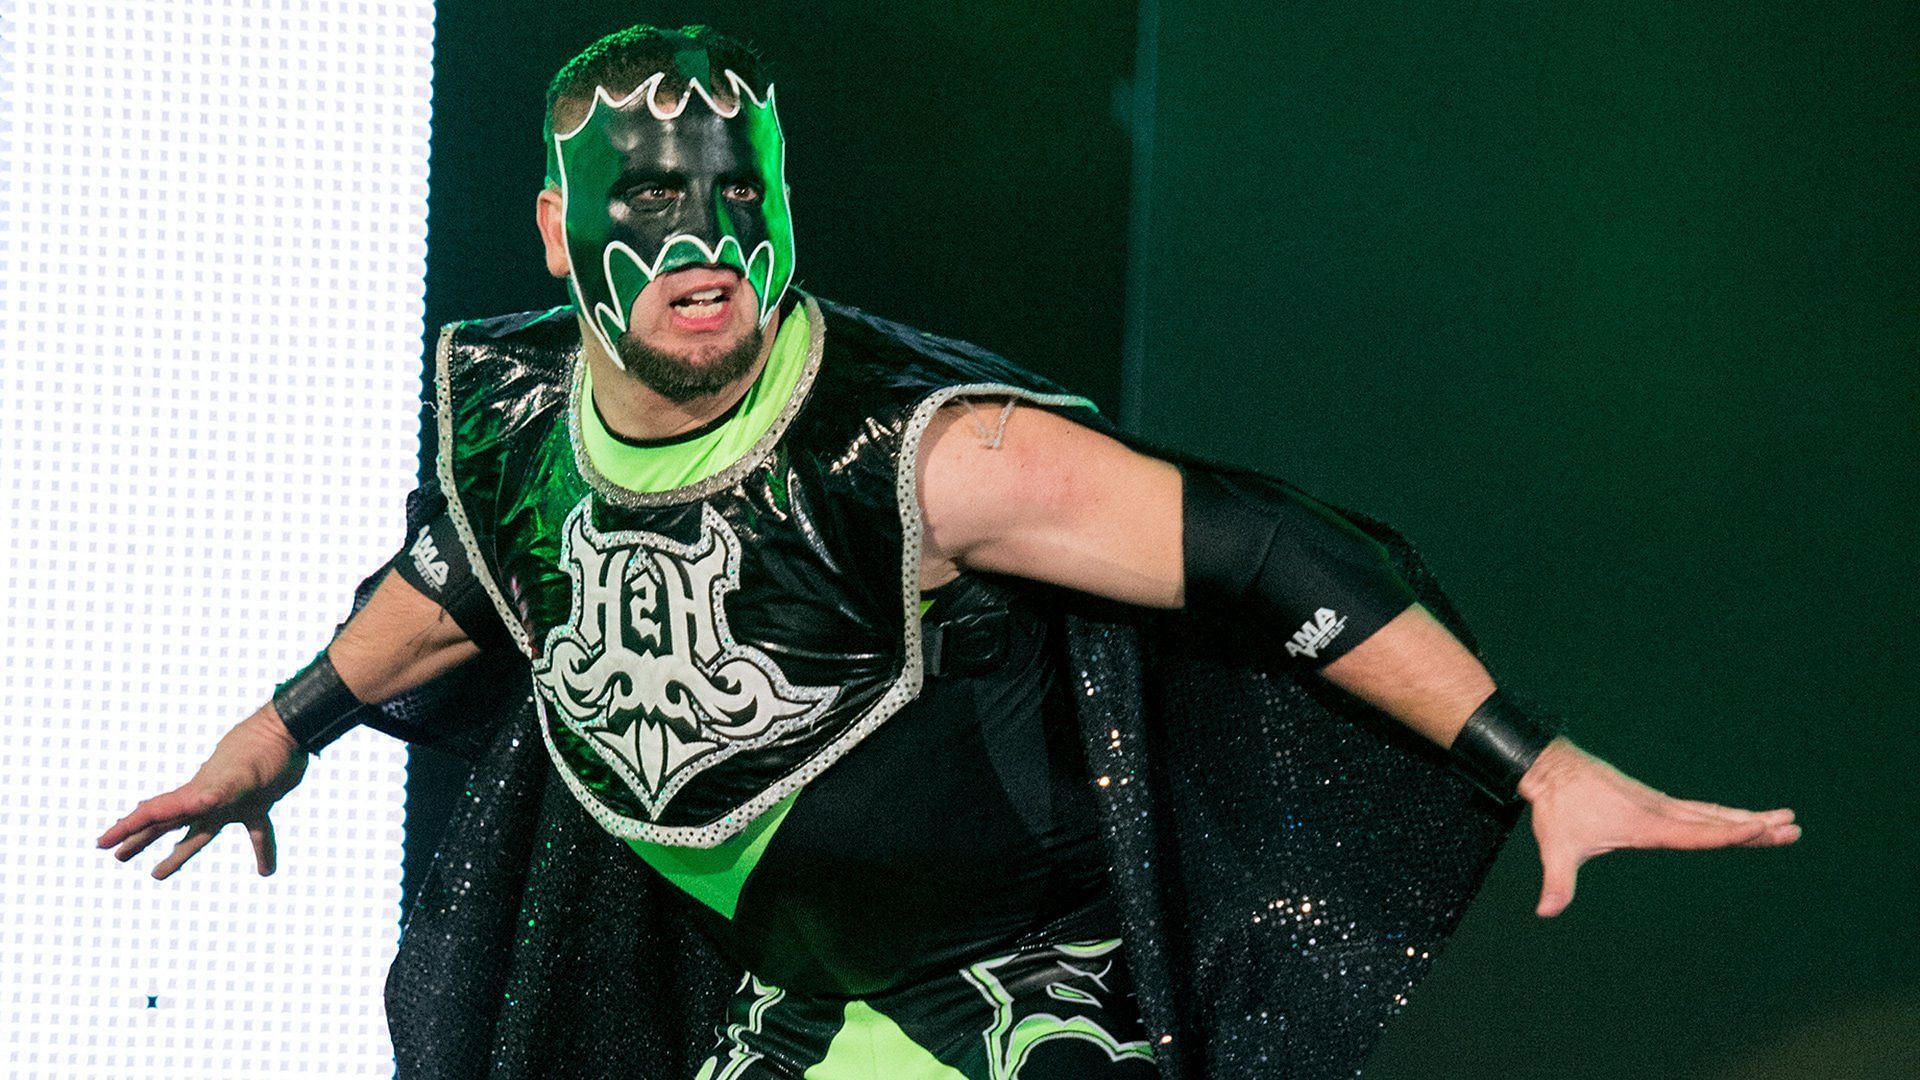 The Hurricane is currently signed to a Legends deal with WWE